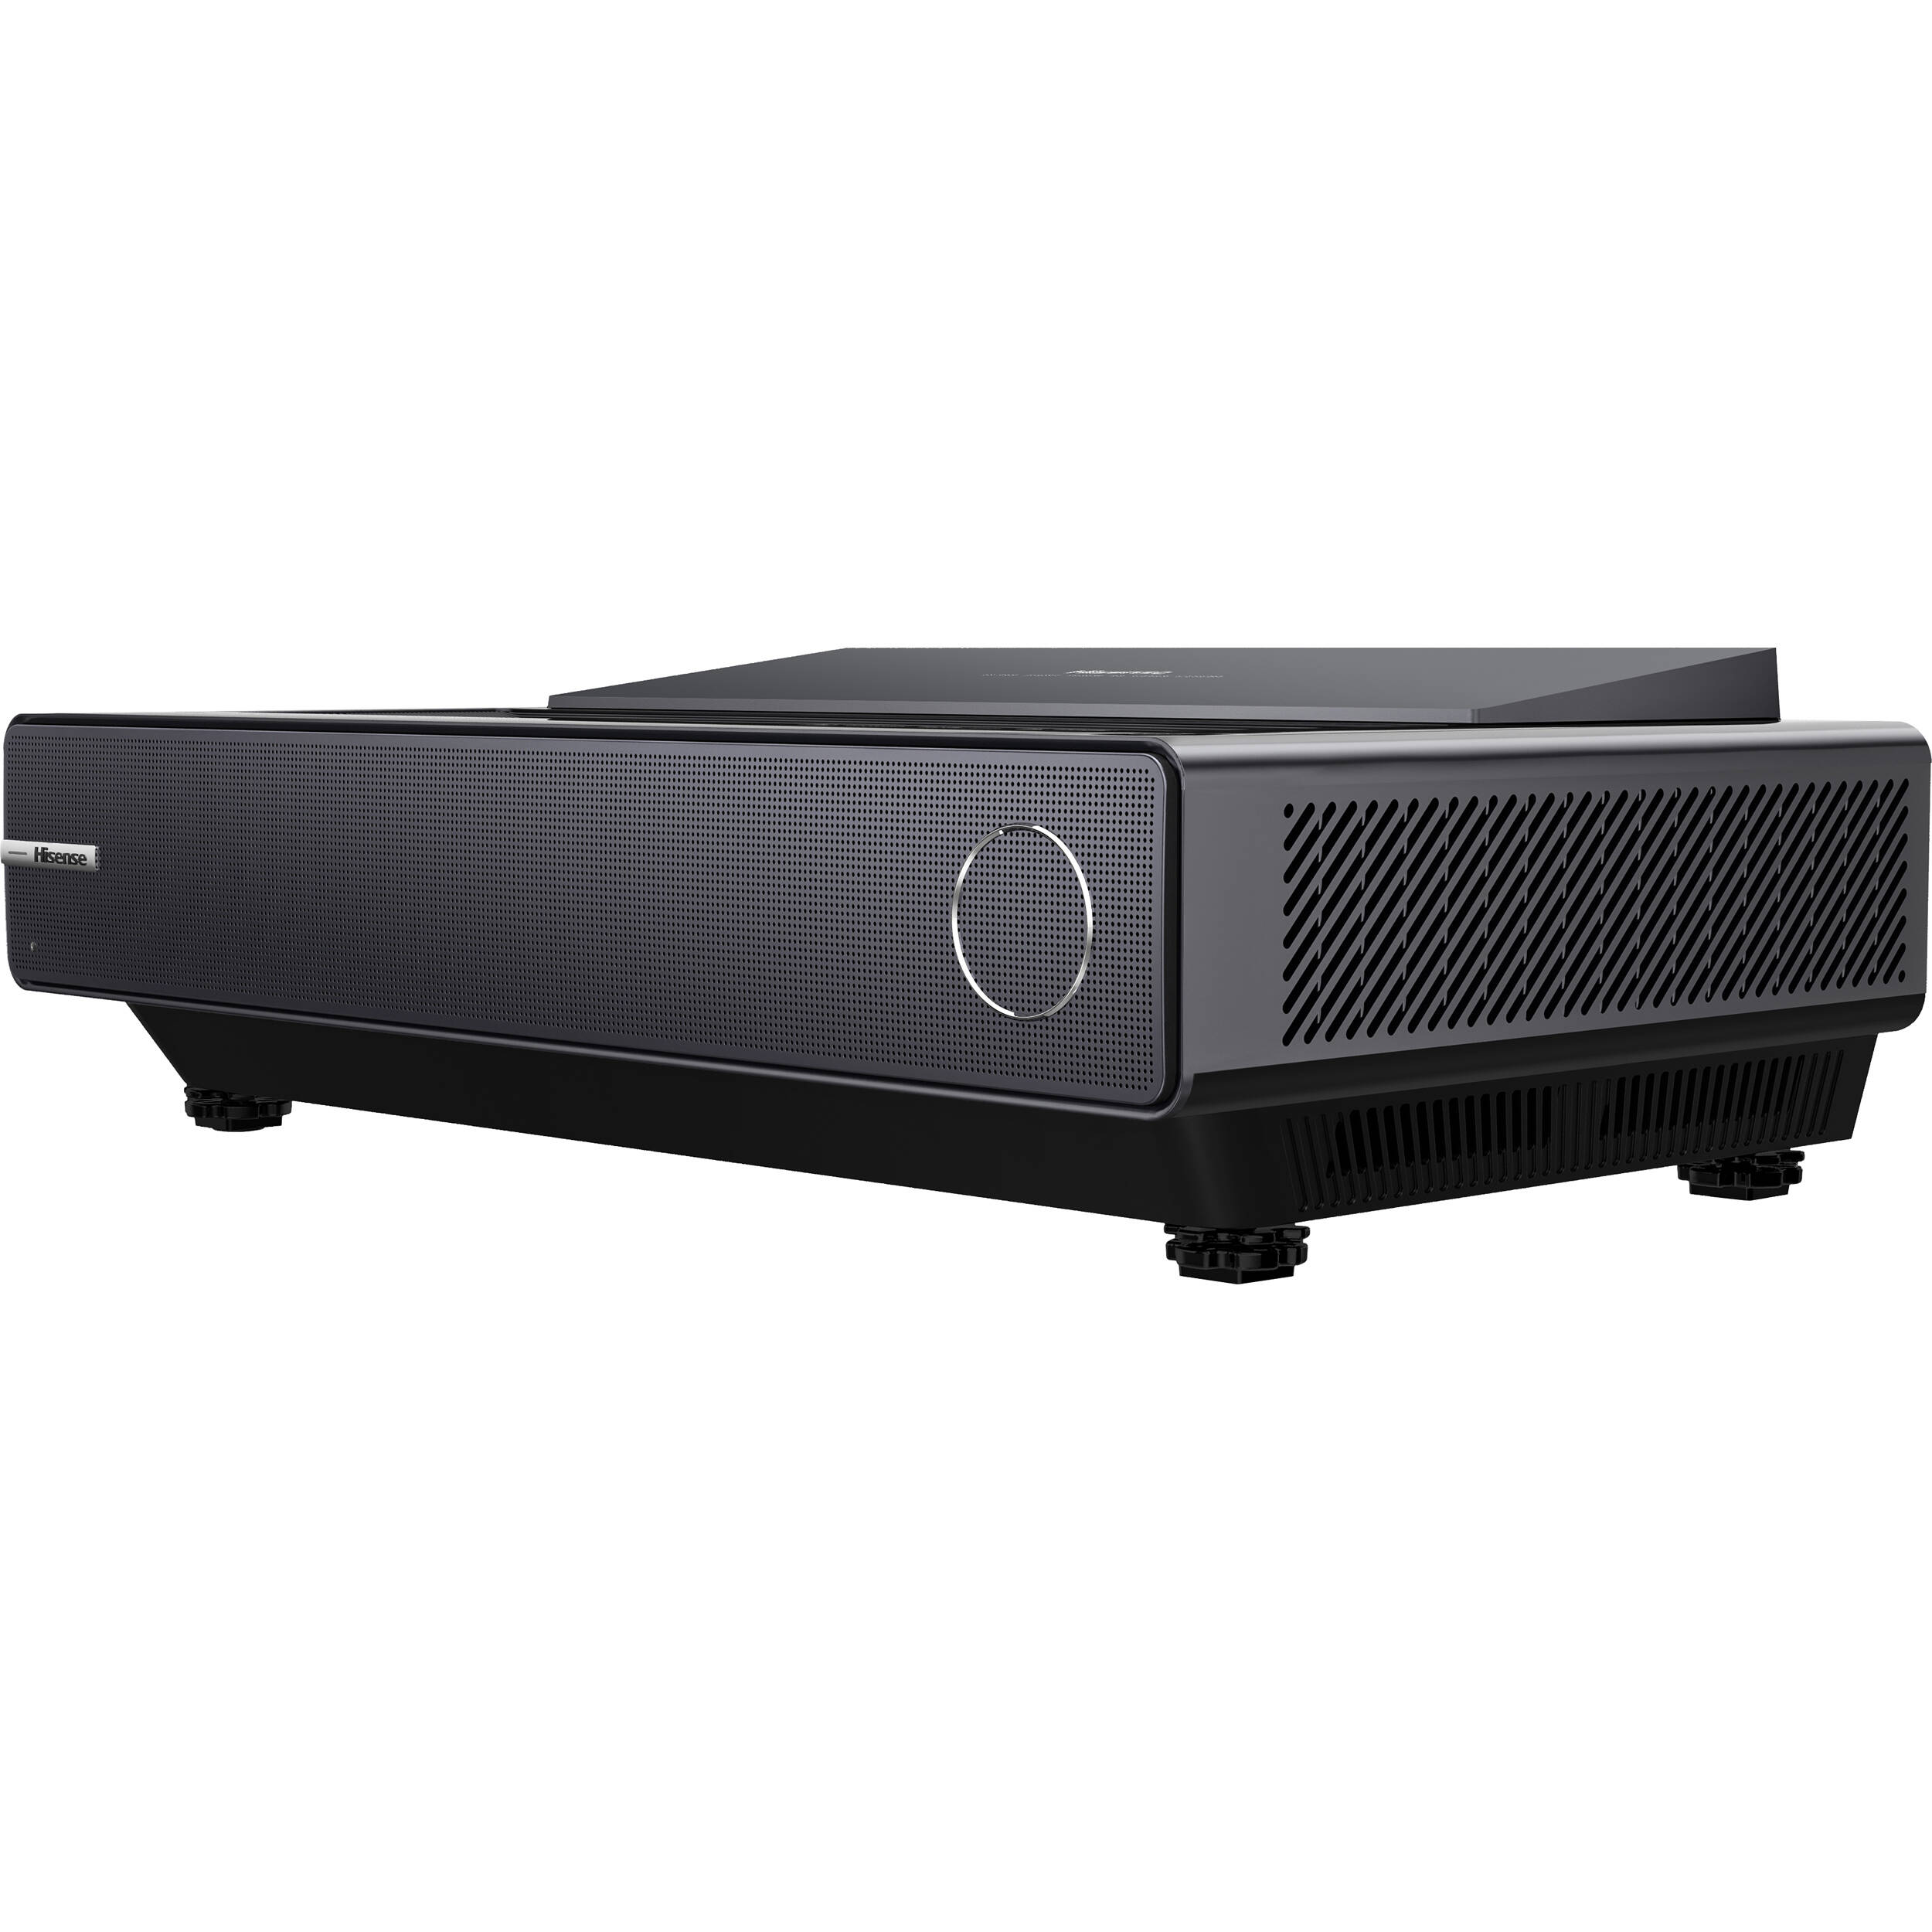 Hisense PX2-PRO-RB TriChroma Laser UST Projector - Certified Refurbished